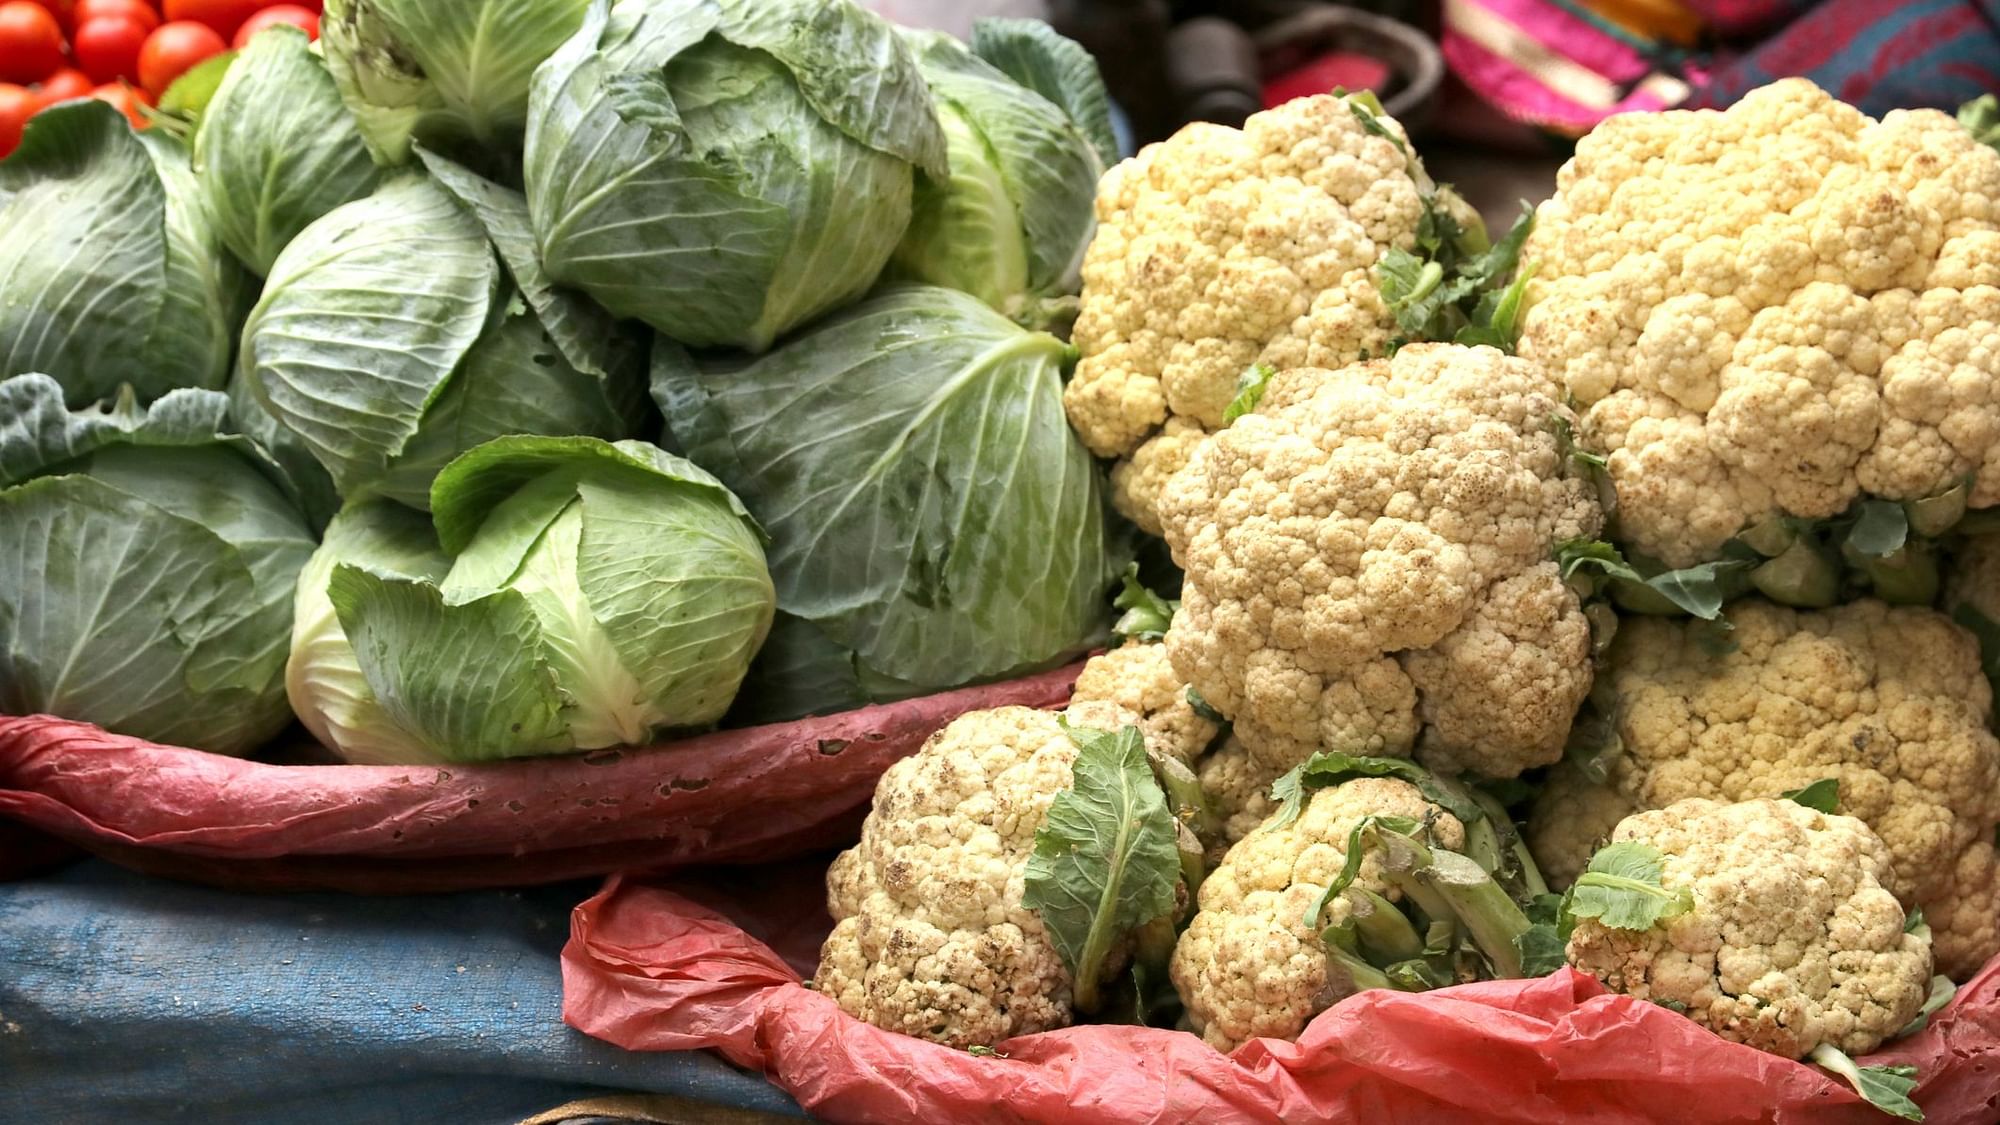 A natural compound found in widely consumed vegetables such as cabbage, kale, and cauliflower may help treat fatty liver disease.